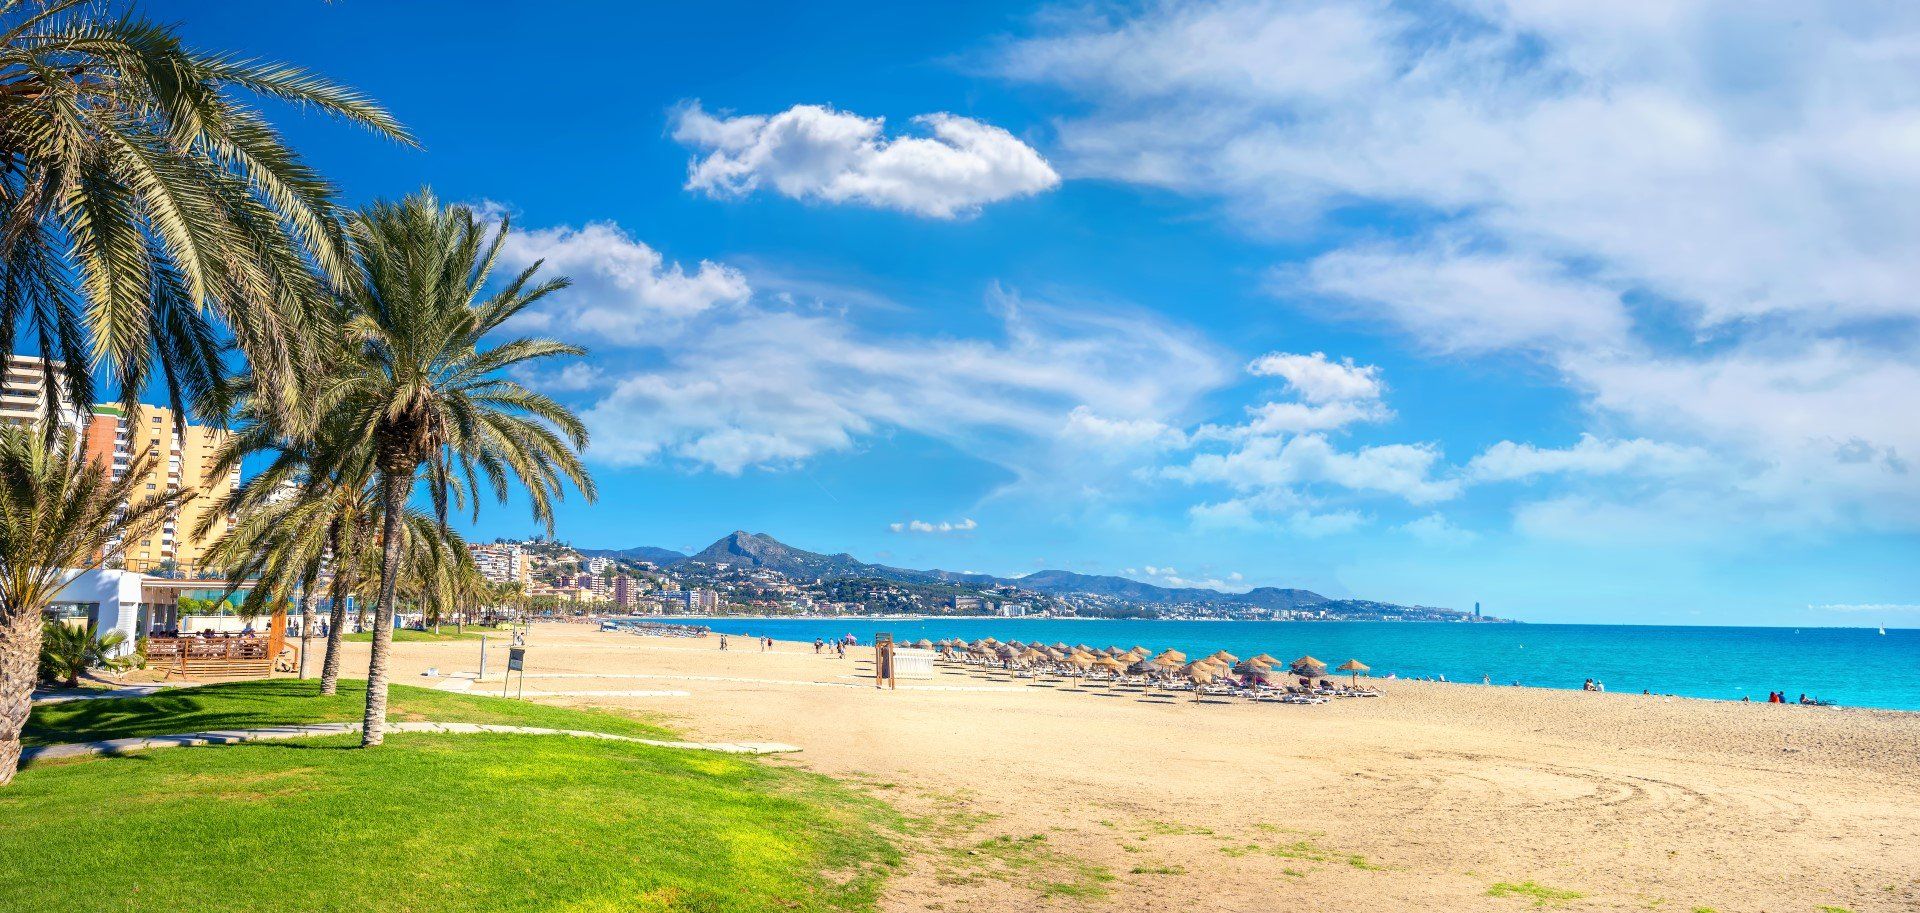 Málaga's most popular beach Malagueta, is a 10-minute walk from the city's centre, stretching 1,200m